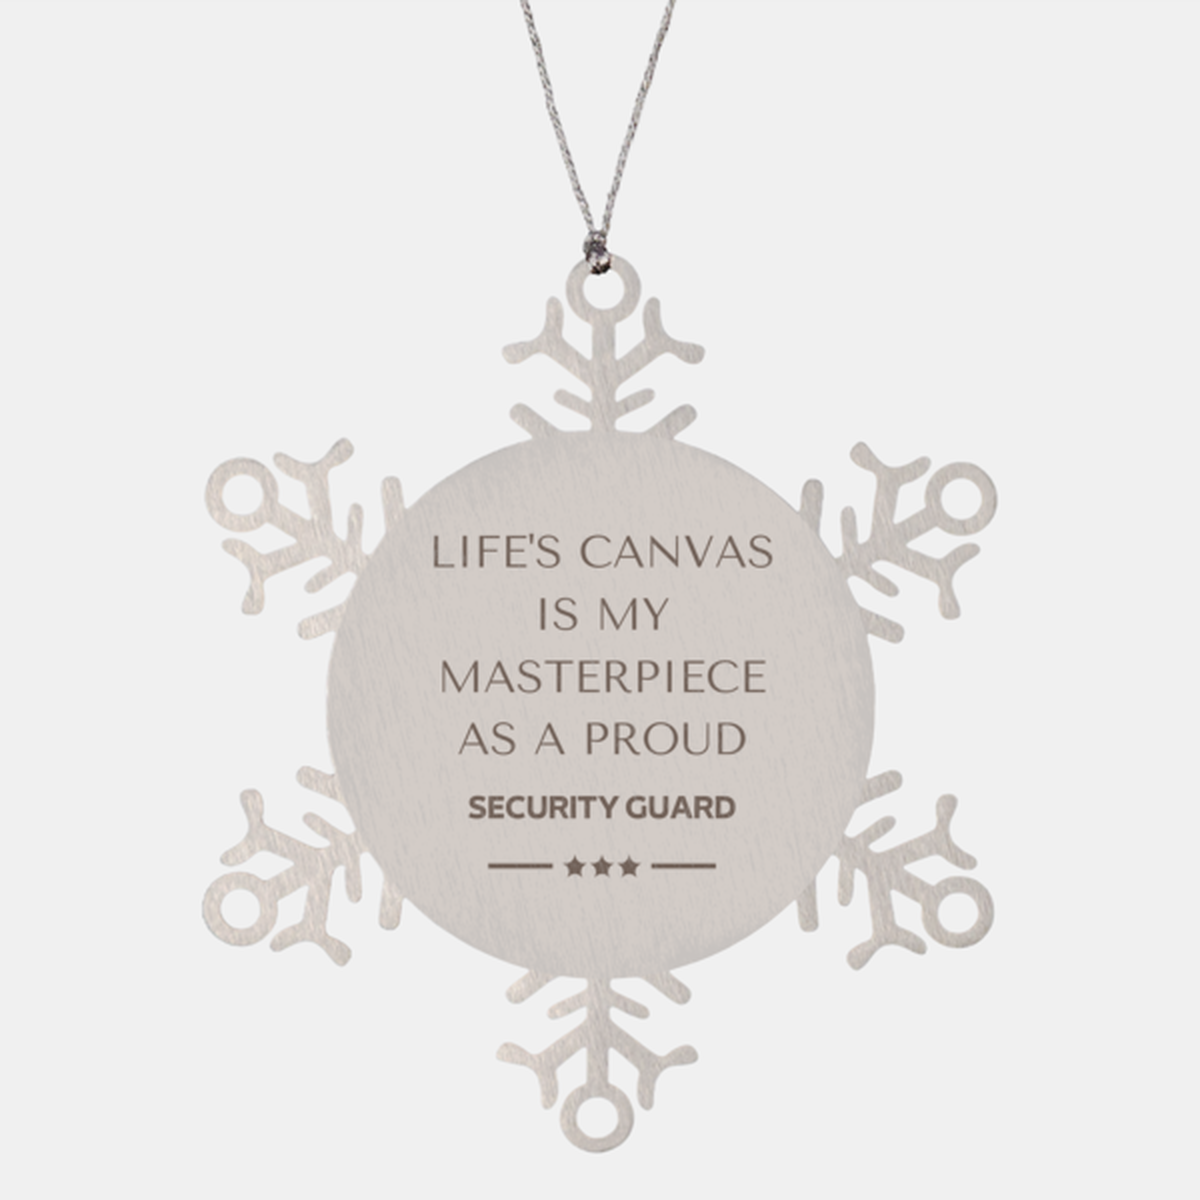 Proud Security Guard Gifts, Life's canvas is my masterpiece, Epic Birthday Christmas Unique Snowflake Ornament For Security Guard, Coworkers, Men, Women, Friends